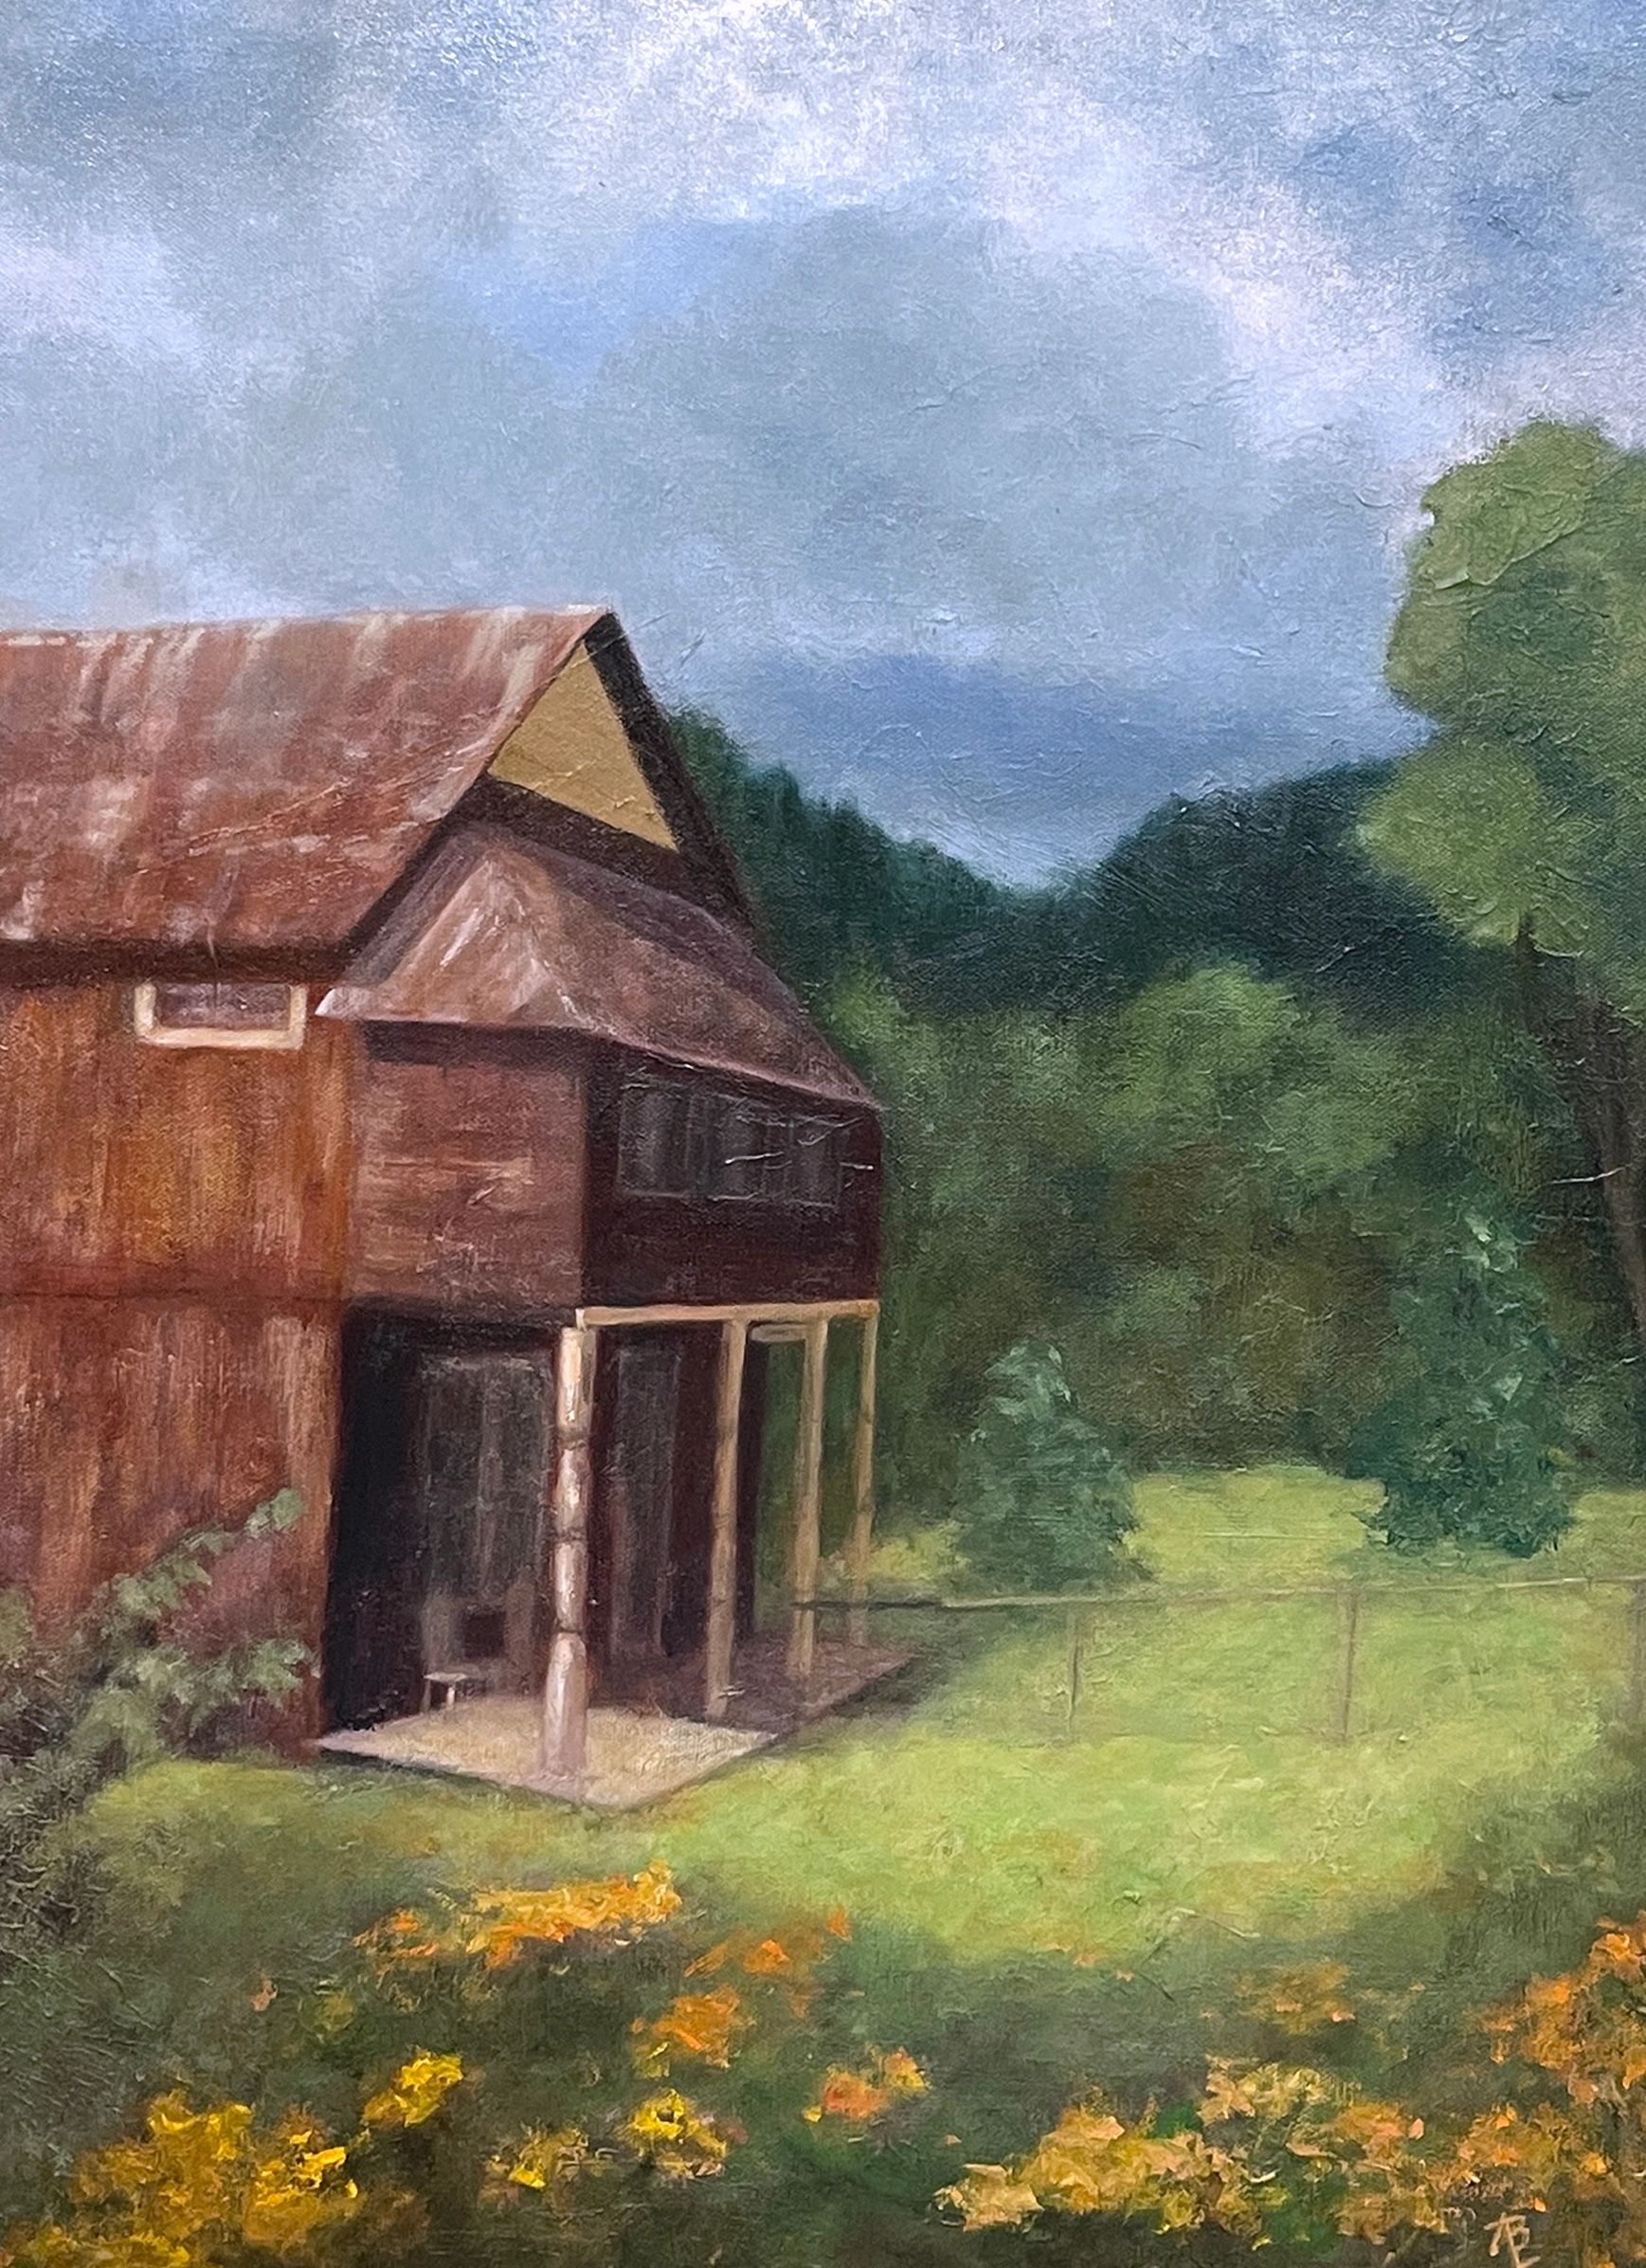 Oil painting of a building in the town of Washington CA among the sierra foothills.